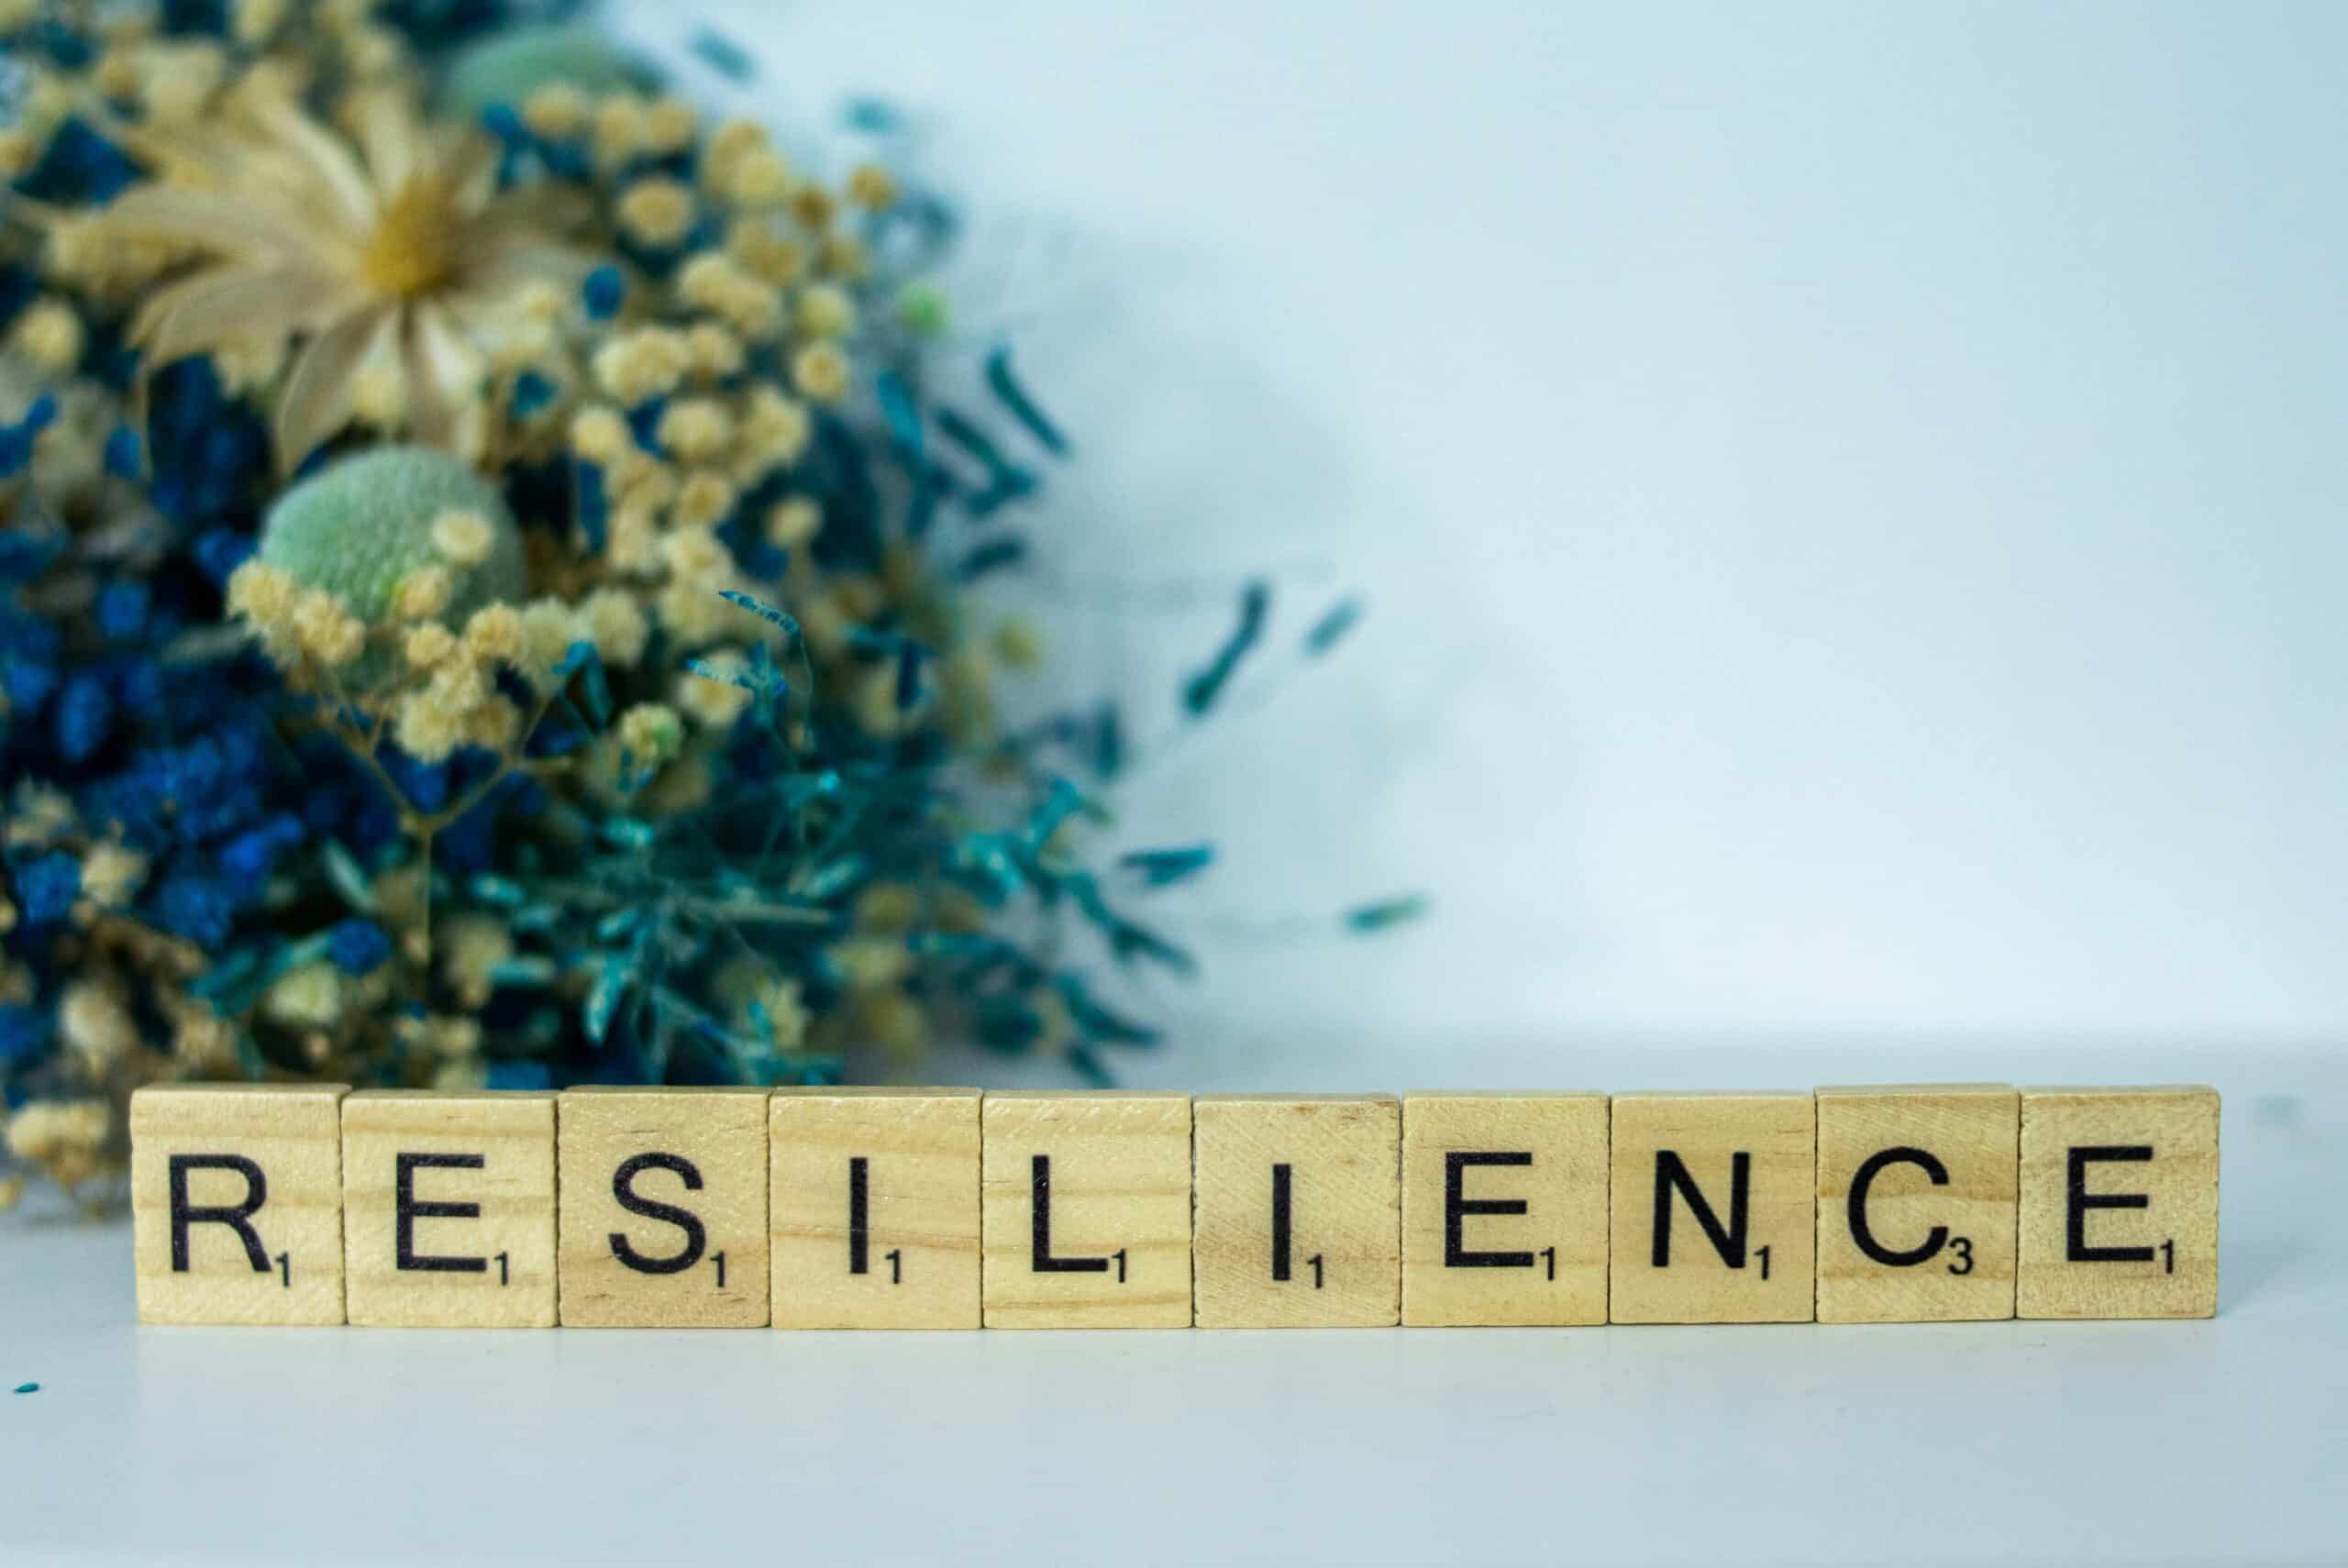 The word resilience spelt out using scrabble tablets